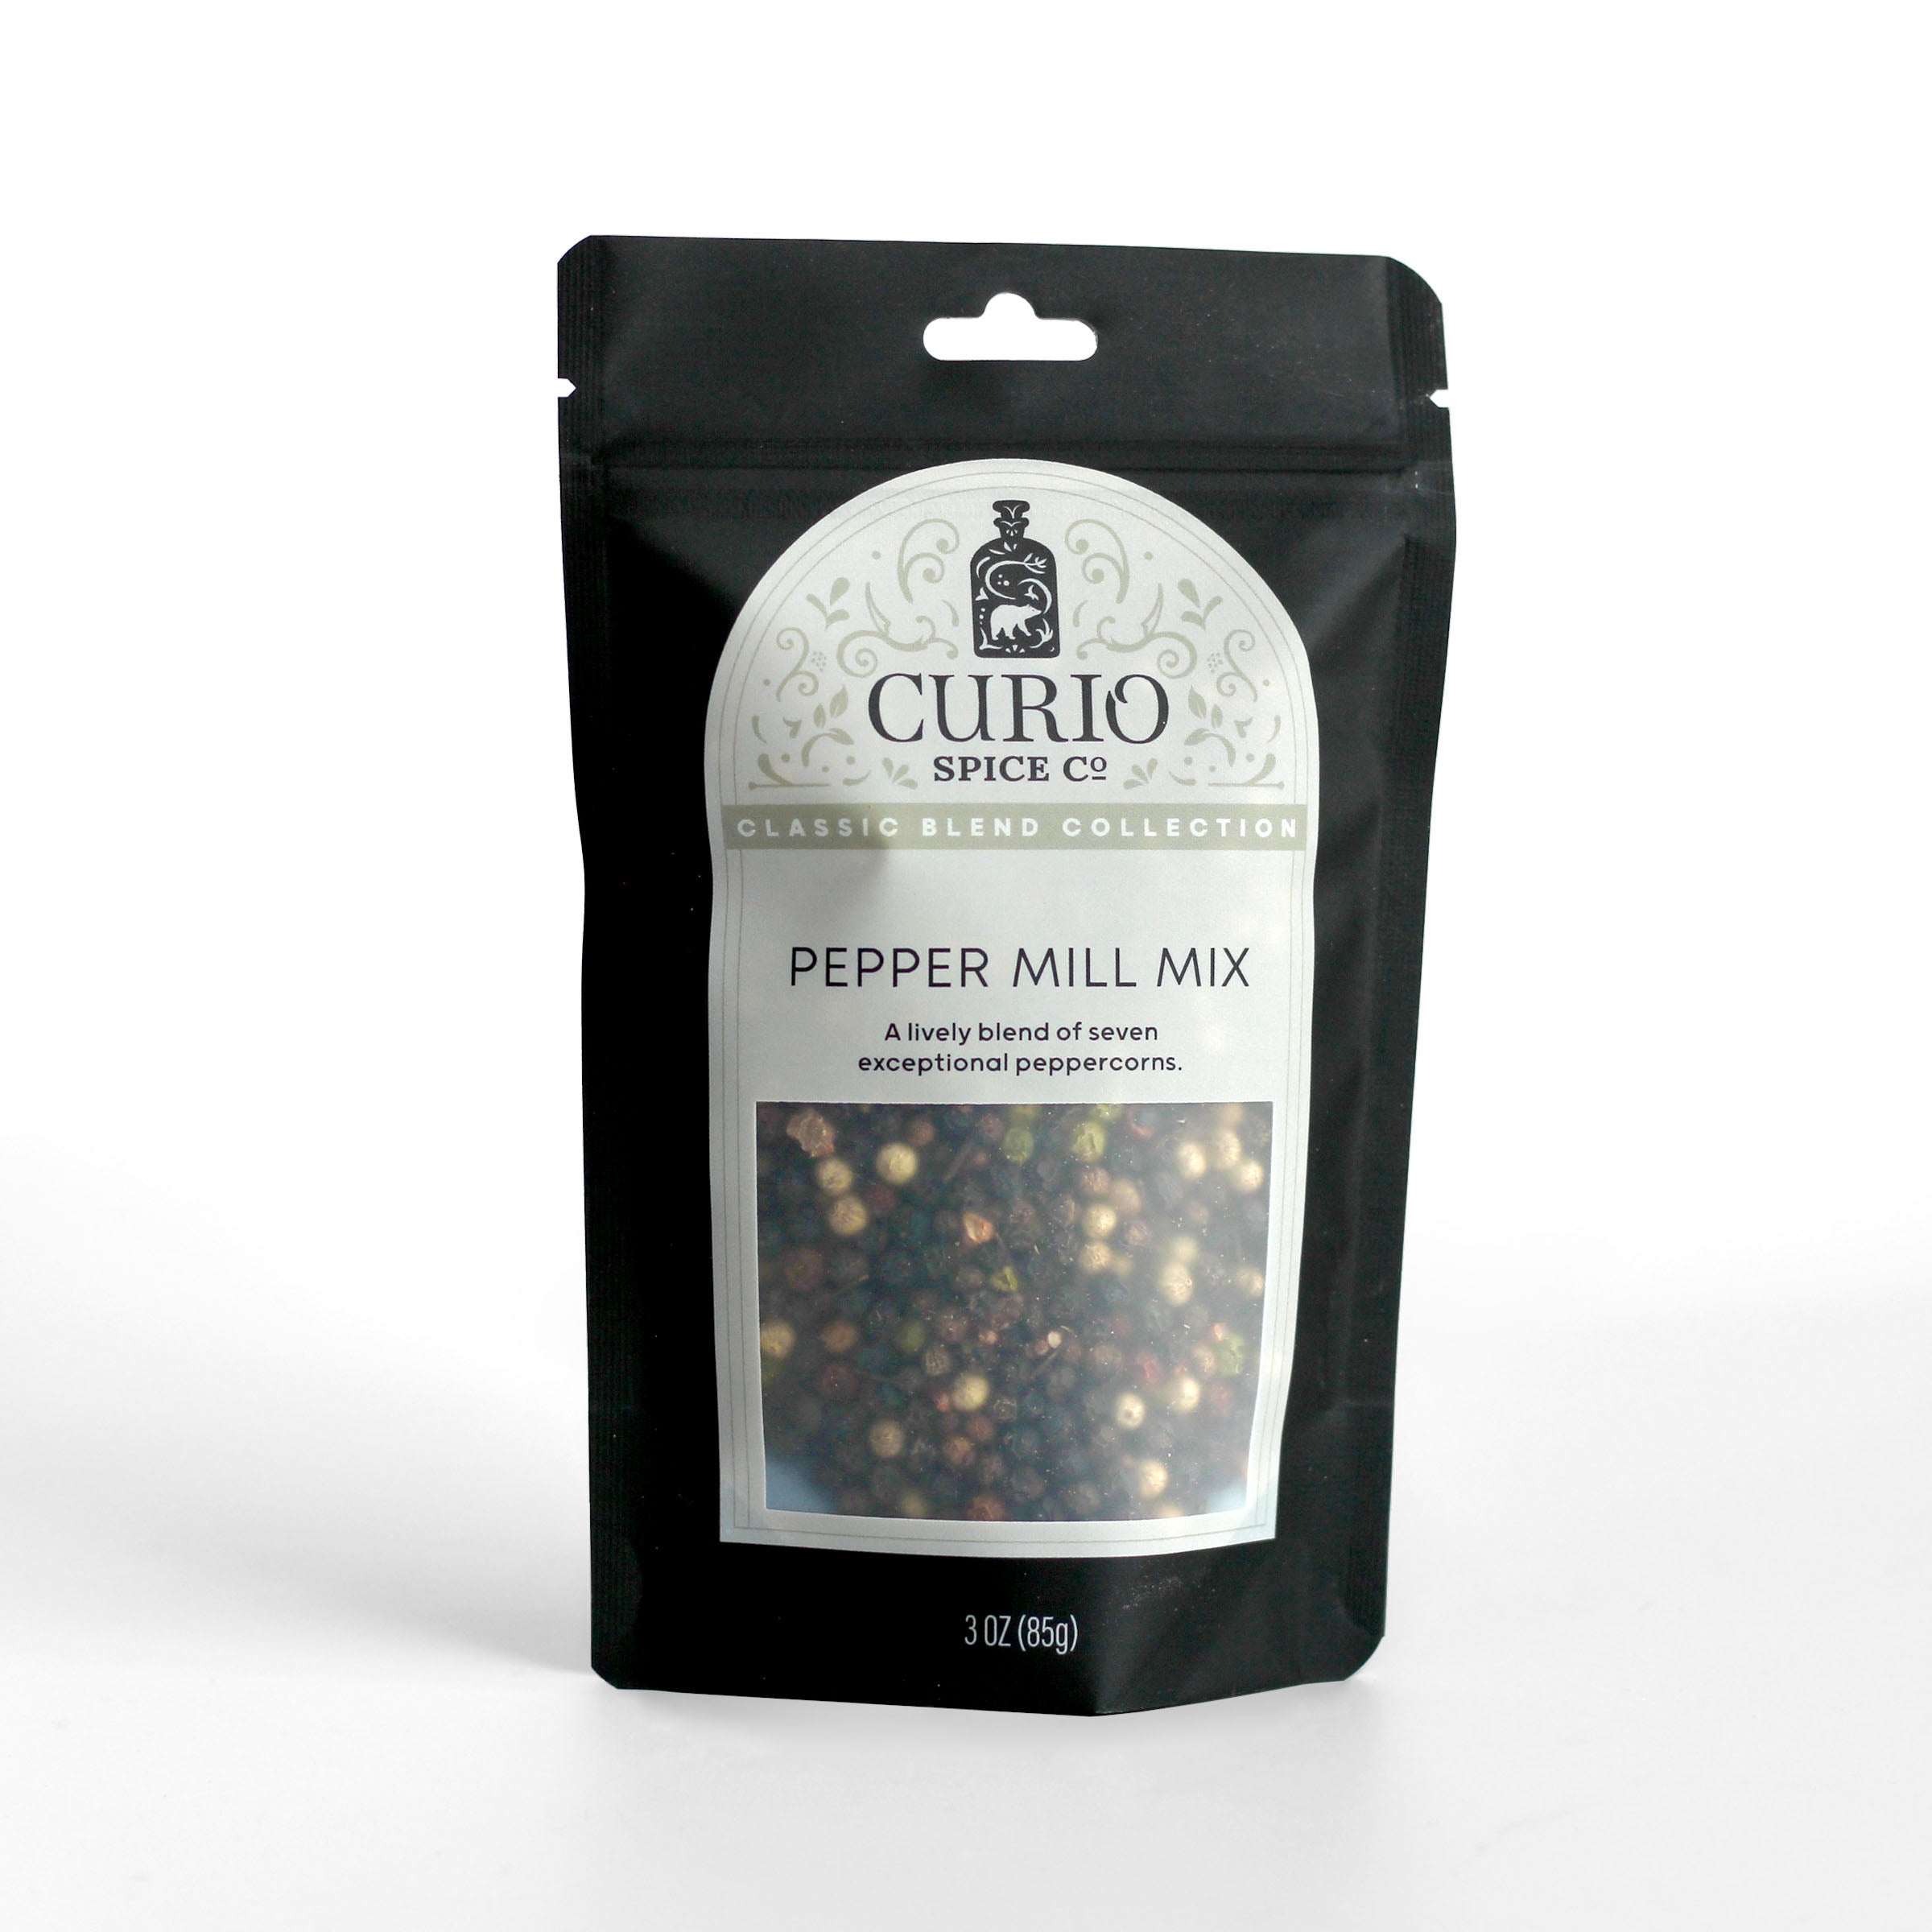 Curio Spice Company Pepper Mill Mix Pantry Pack Bag (3 oz)